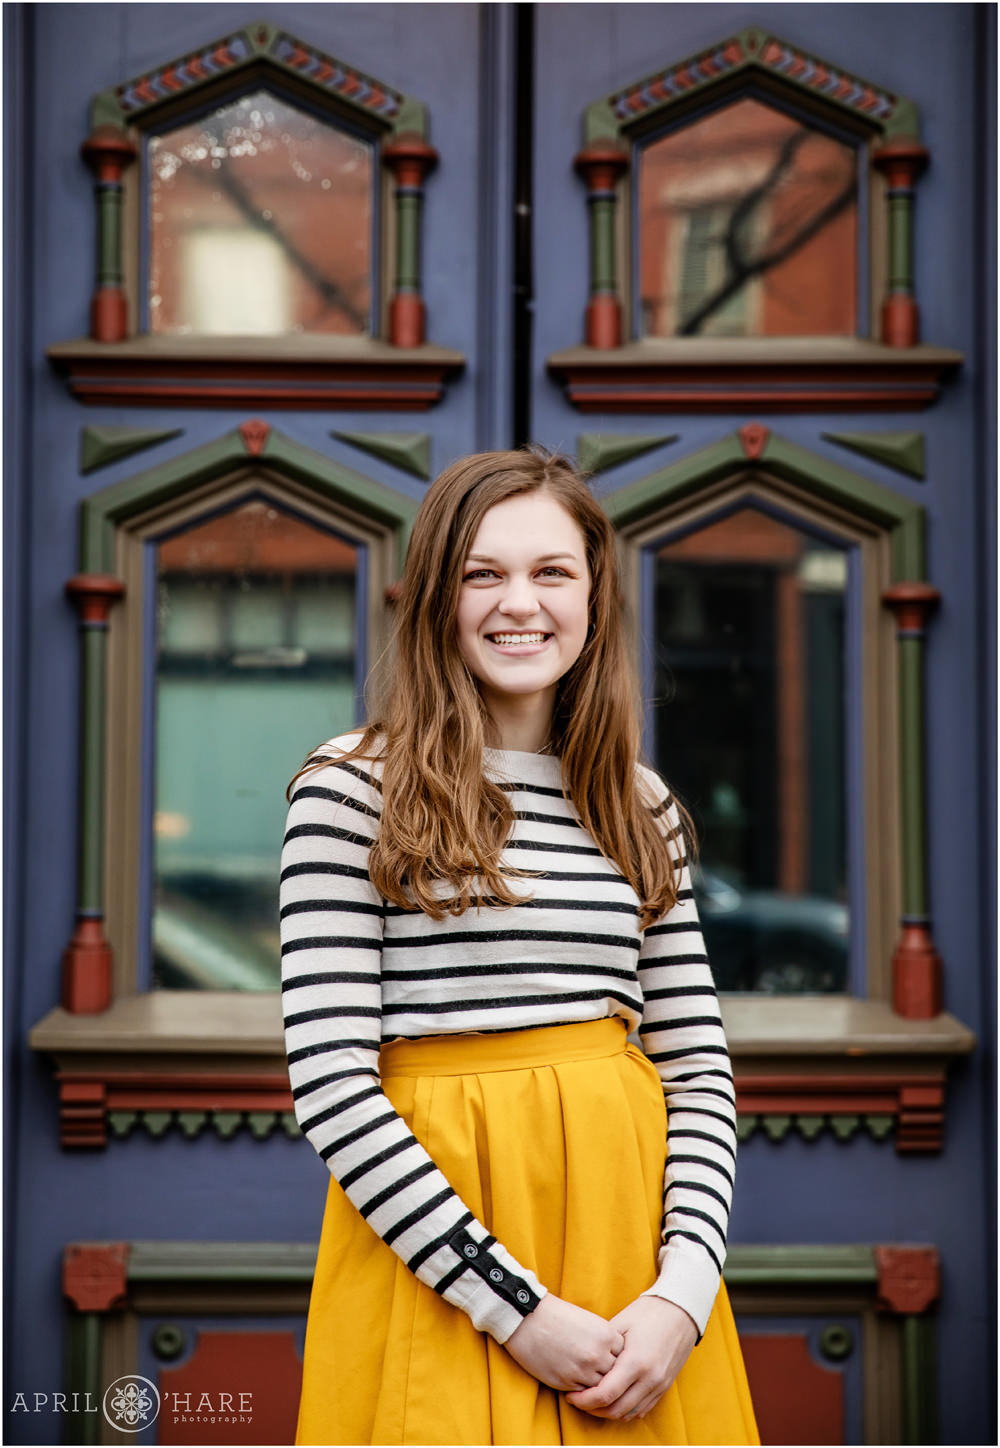 Pretty Colorful Door Backdrop at a  Denver Senior yearbook Session